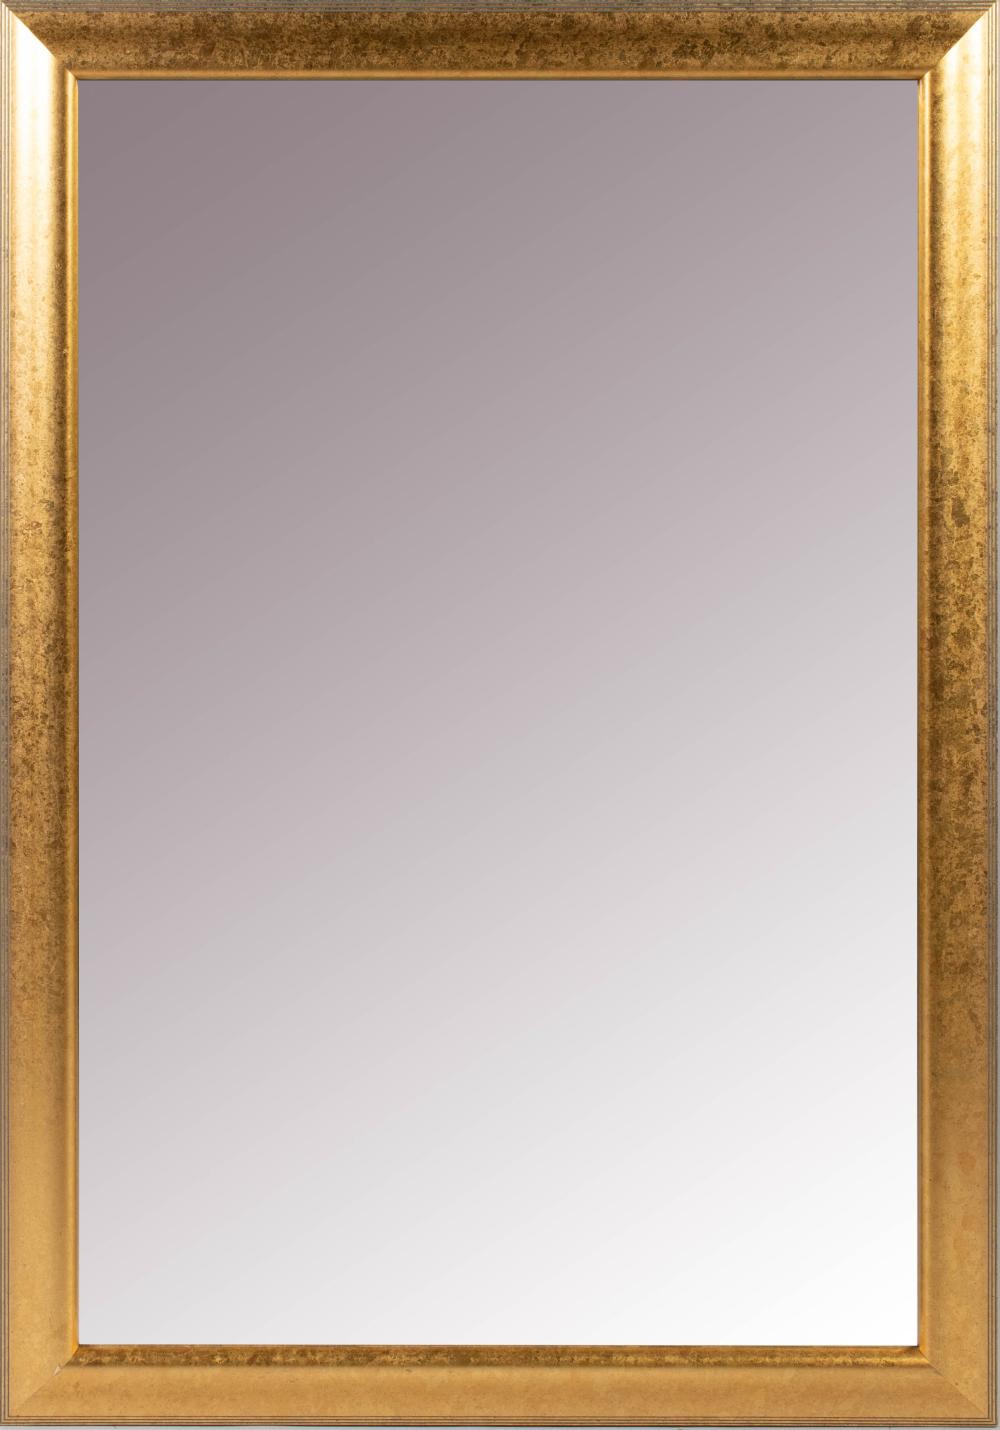 CLASSICAL STYLE GOLD FINISHED MIRROR 33c84a